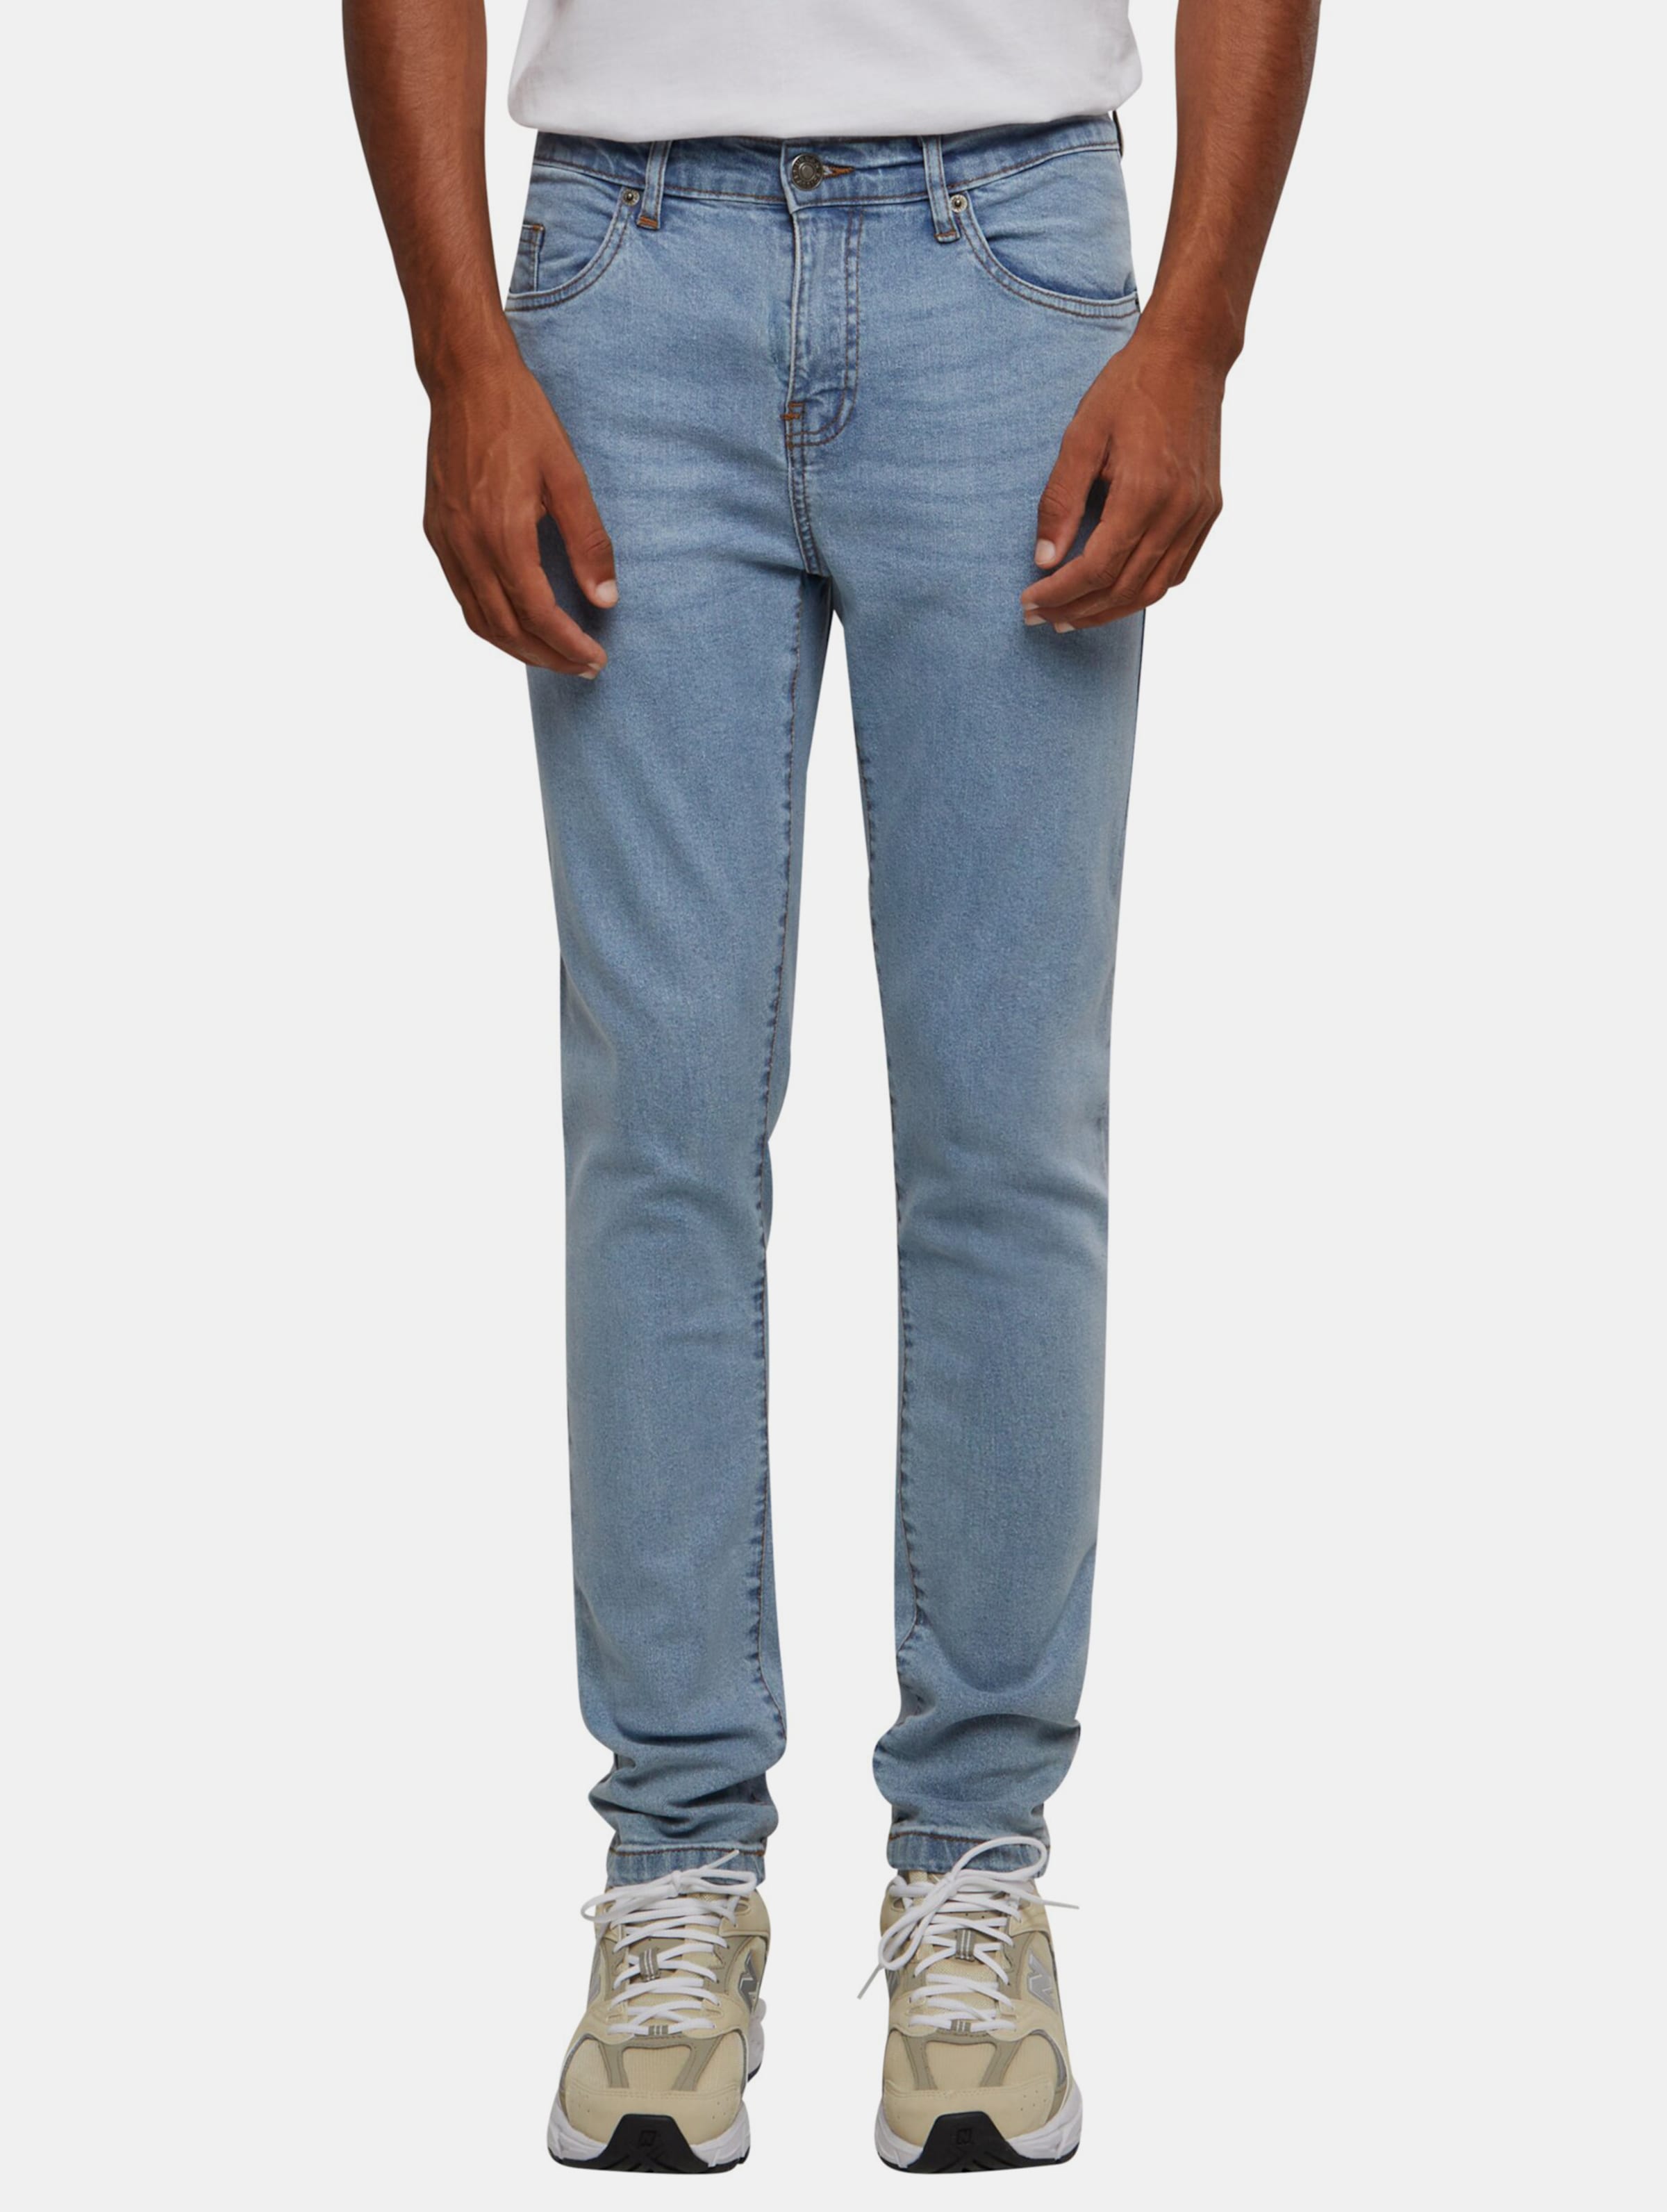 Urban Classics - Heavy Ounce Slim Fit Skinny jeans - Taille, 36 inch - Blauw